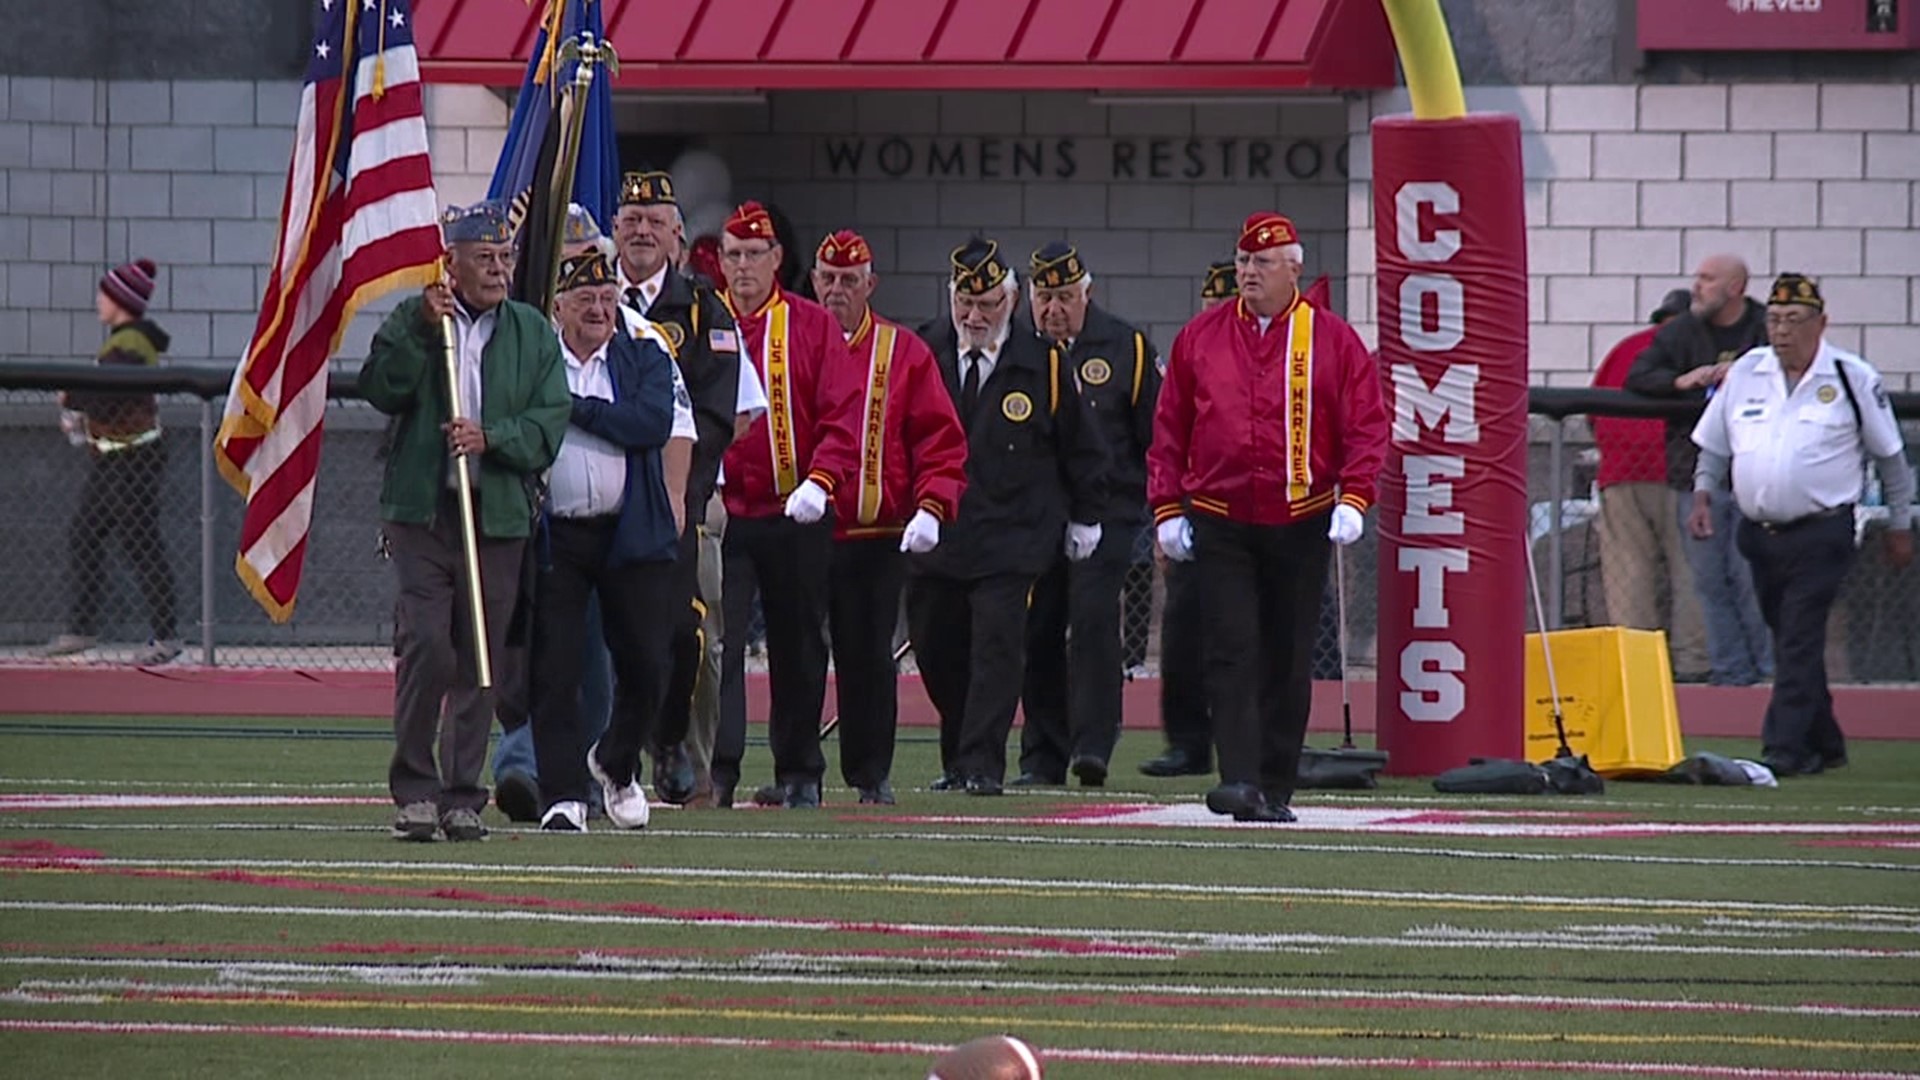 There was more to celebrate than football at one high school Friday night. Fans came out to support veterans and those currently serving our country in the military.